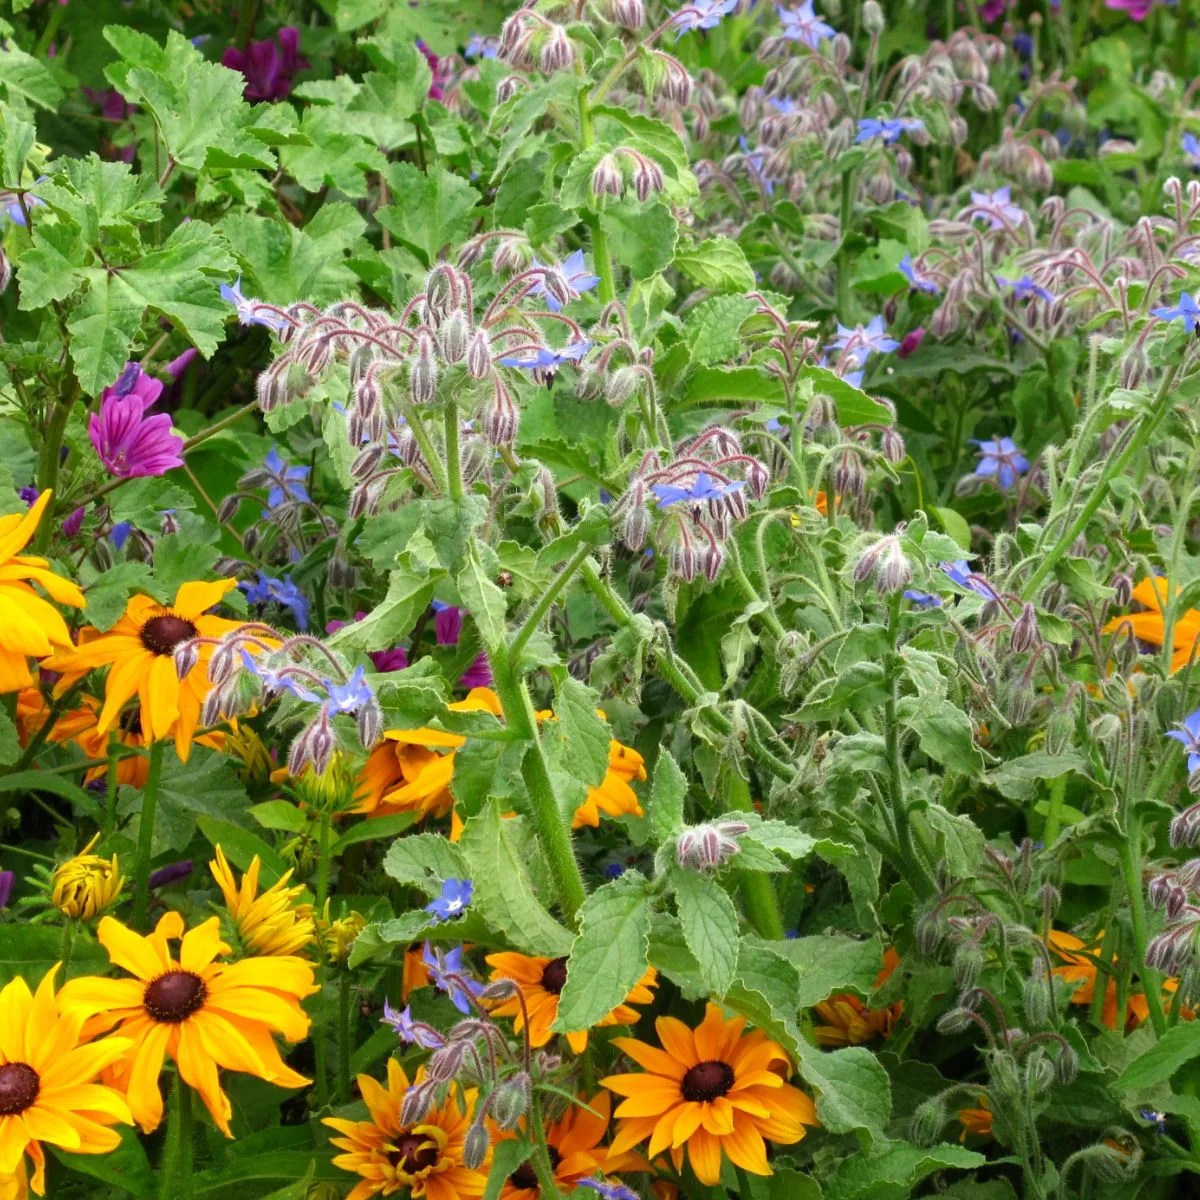 Borage and rudbeckia flowers in the garden.